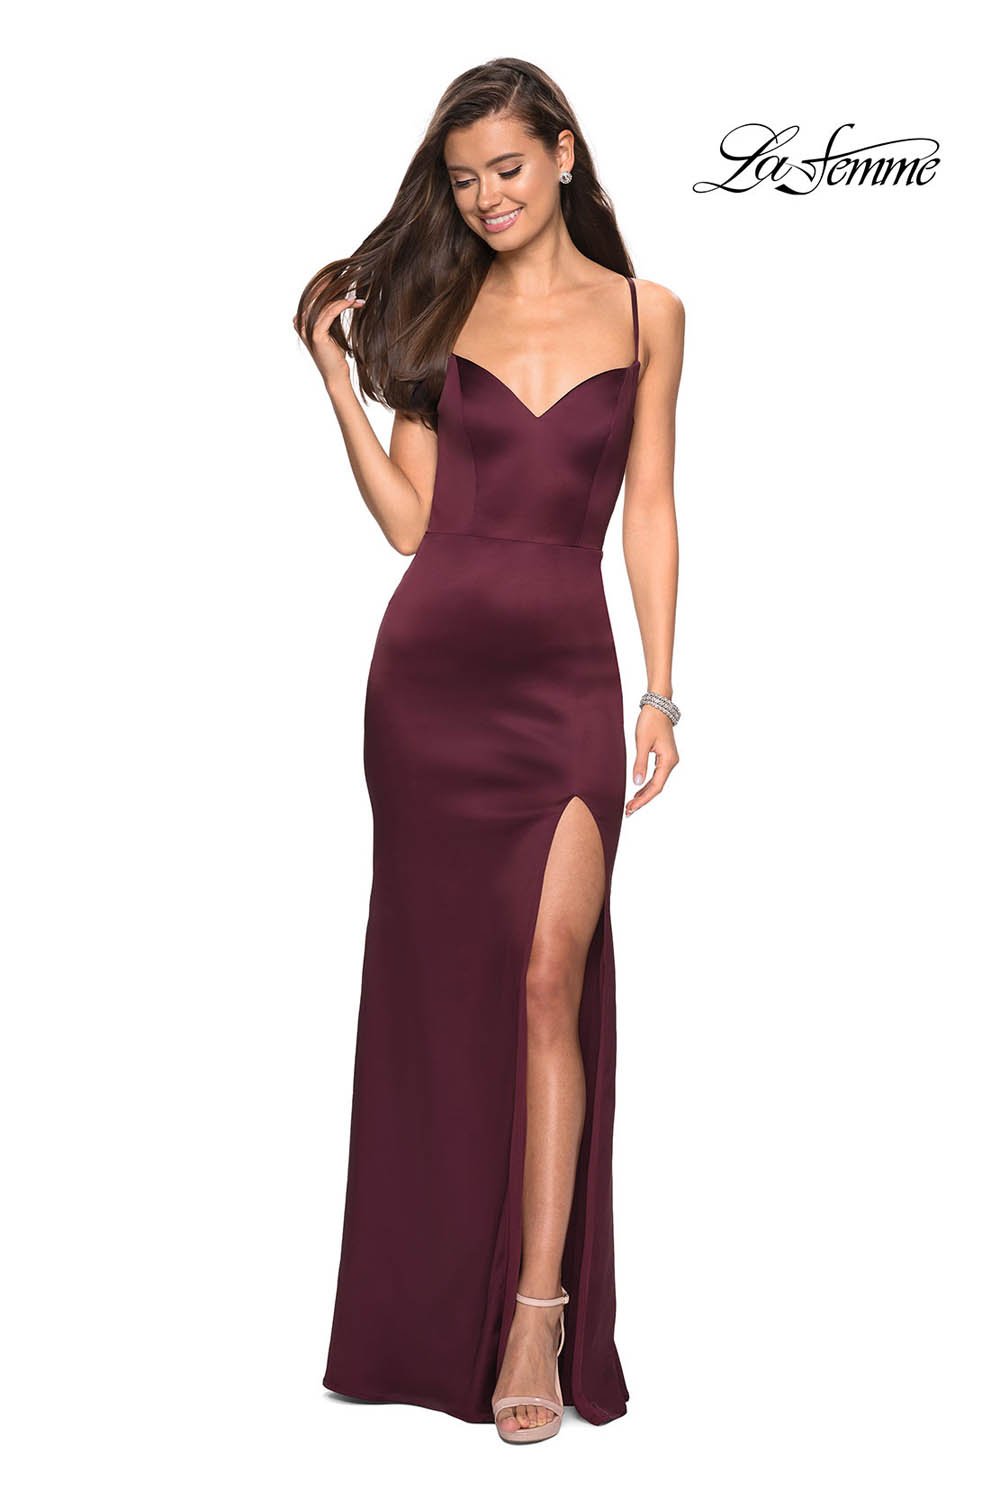 La Femme 27758 dress images in these colors: Burgundy.